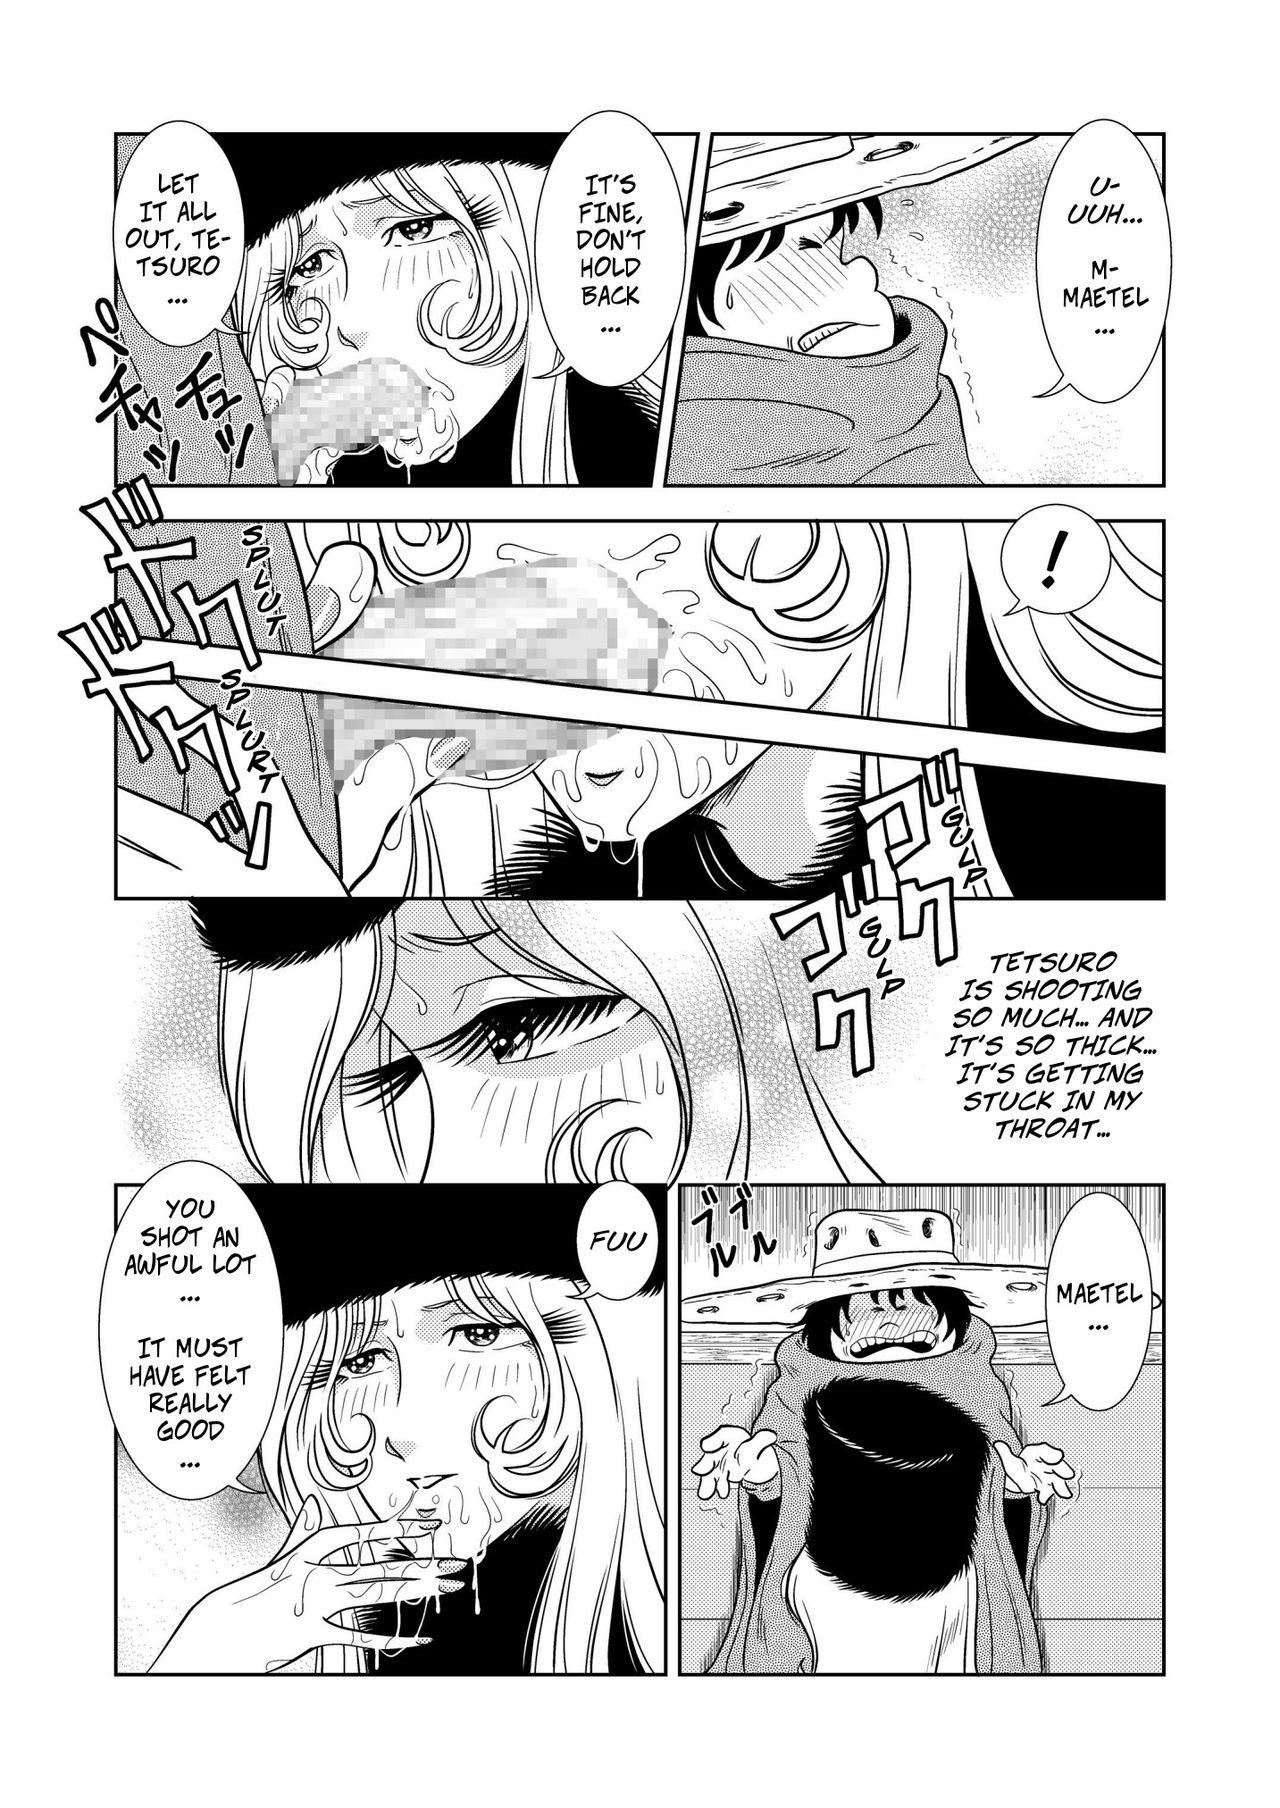 Blowjob Contest Maetel Story 2 - Galaxy express 999 Curves - Page 10